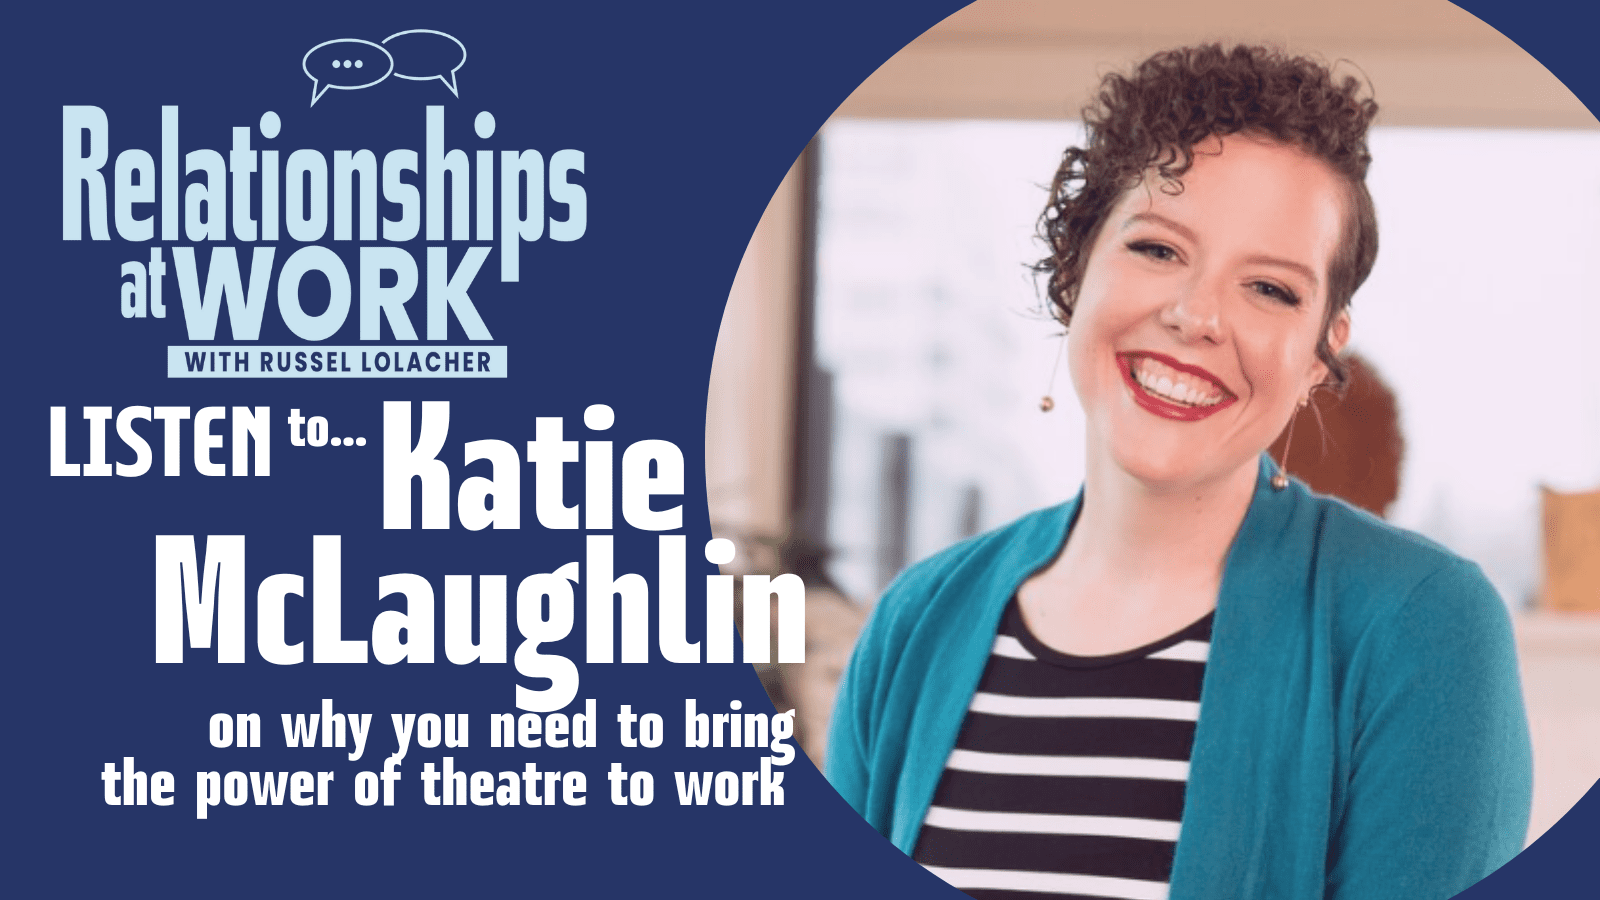 Katie McLaughlin on theatre principles in the workplace